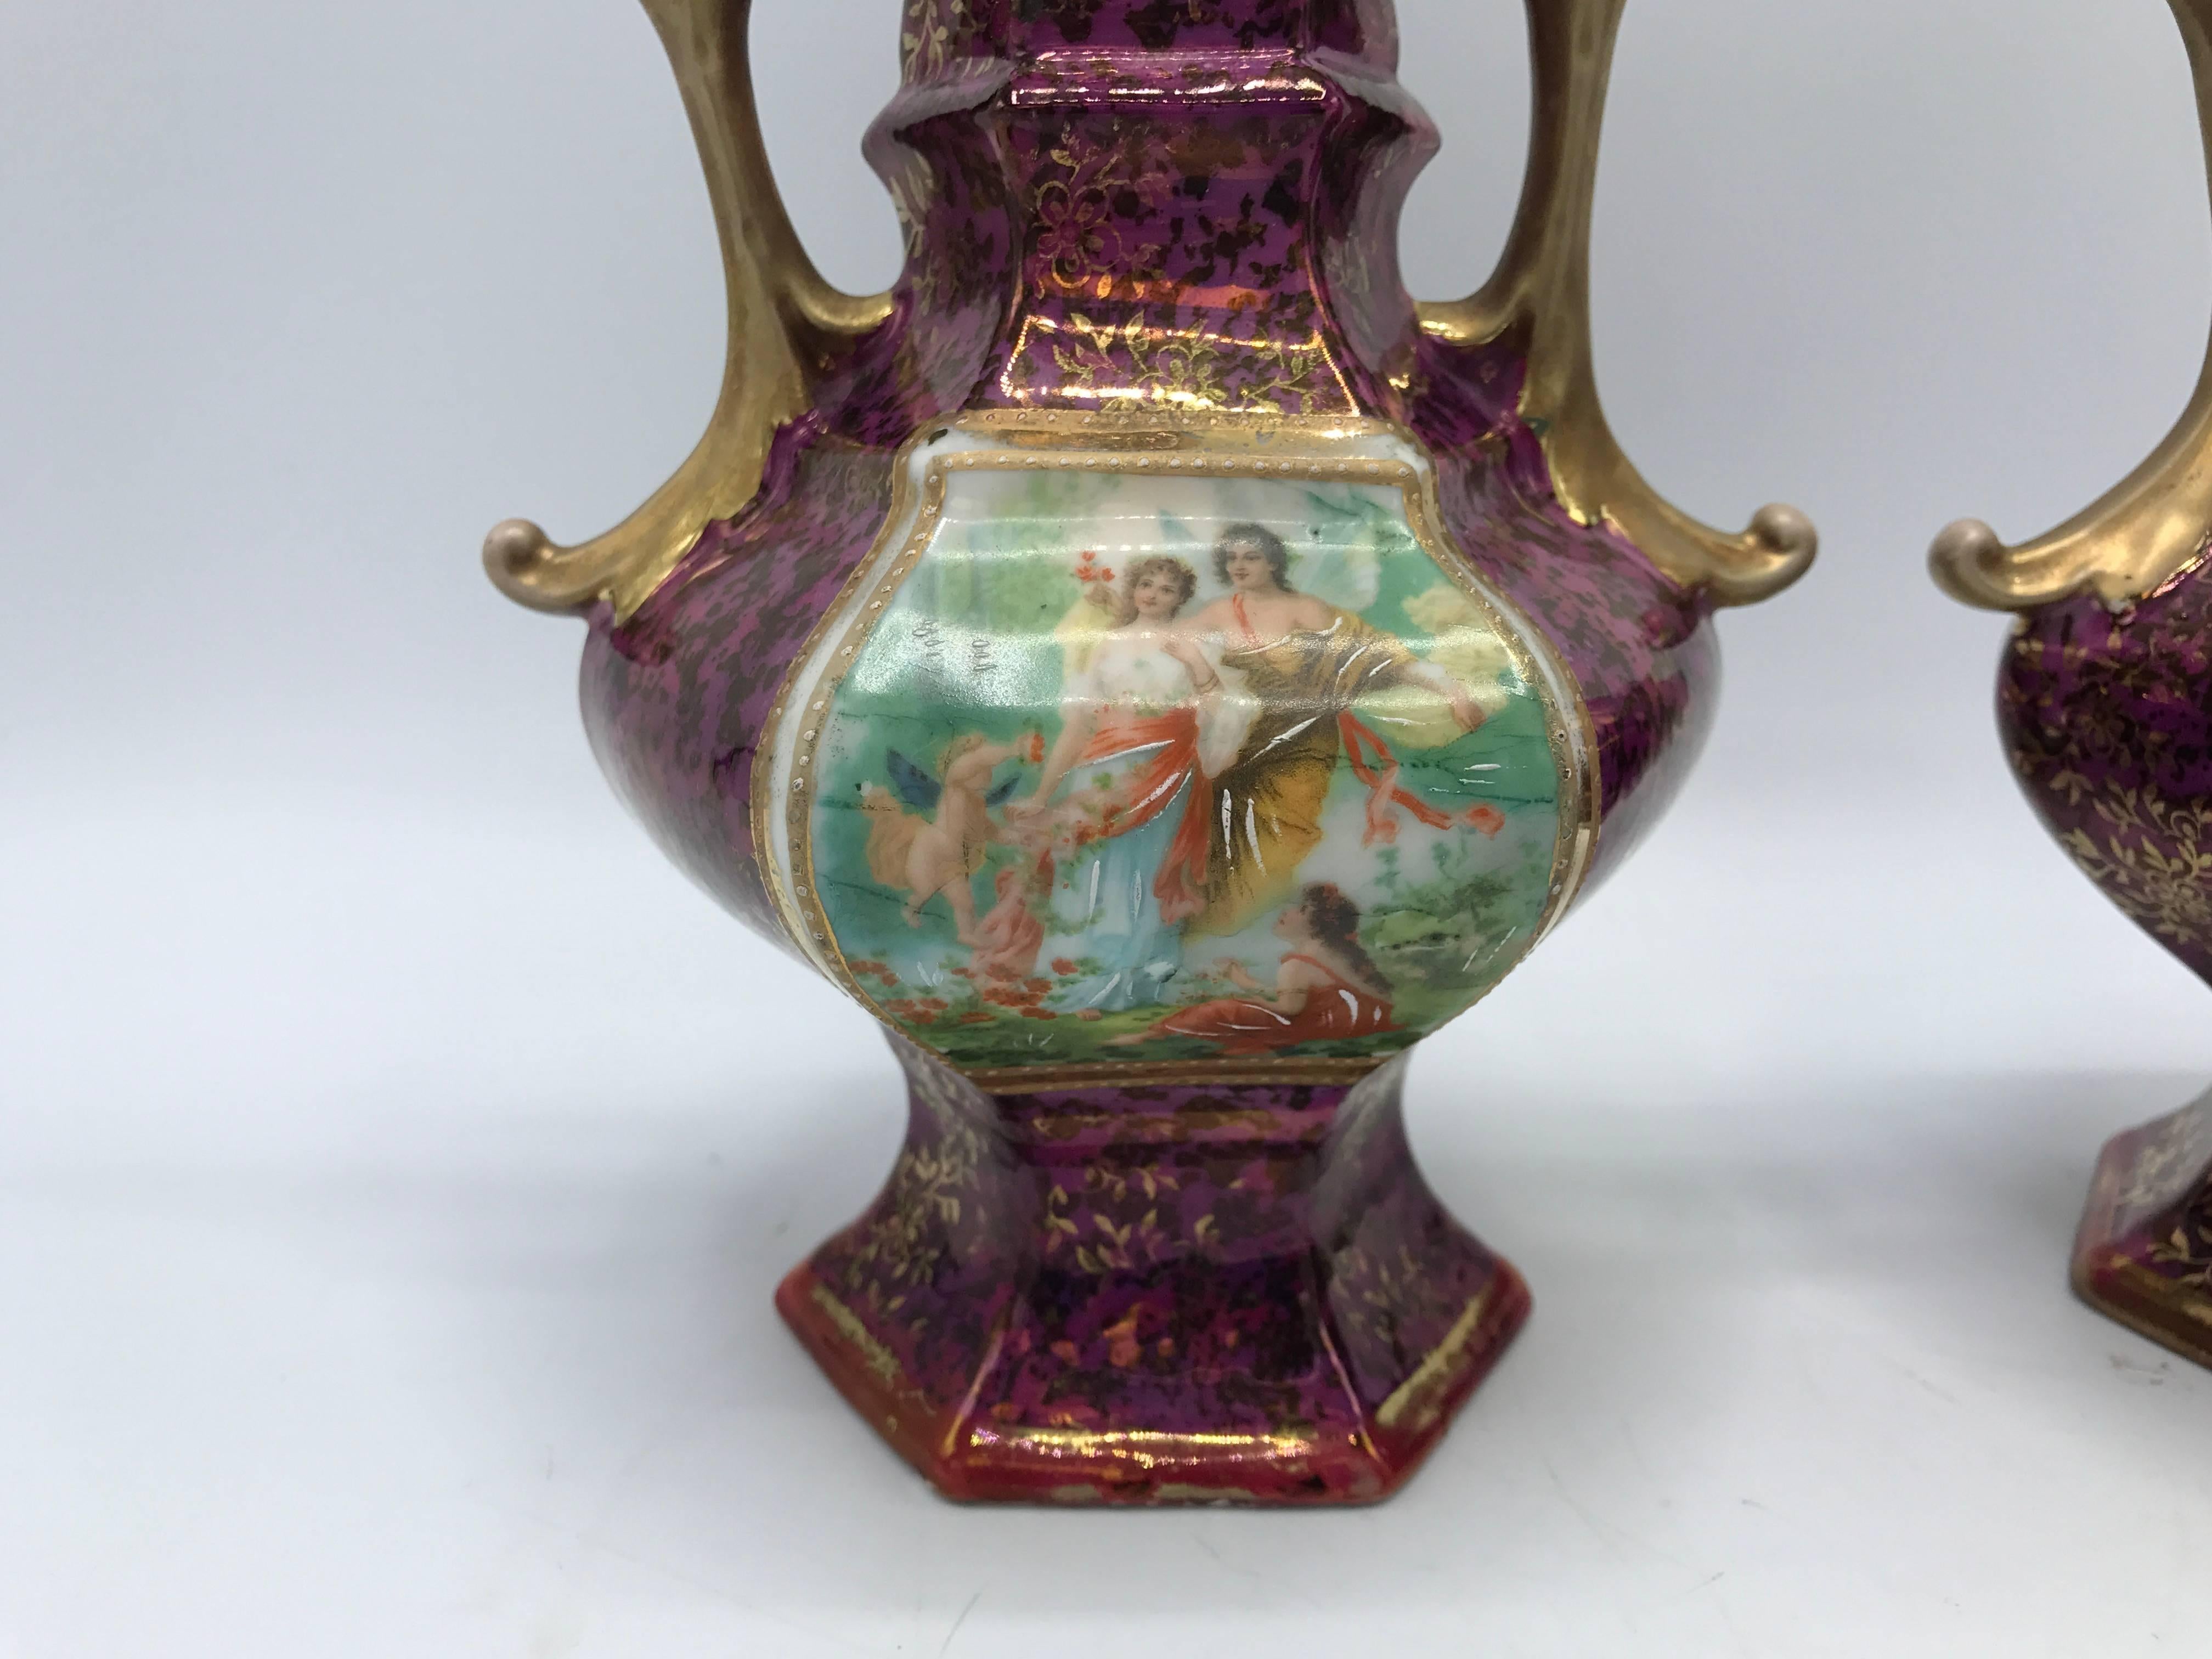 French Provincial 19th Century French Hand-Painted Pink and Gold Vases with Handles, Pair